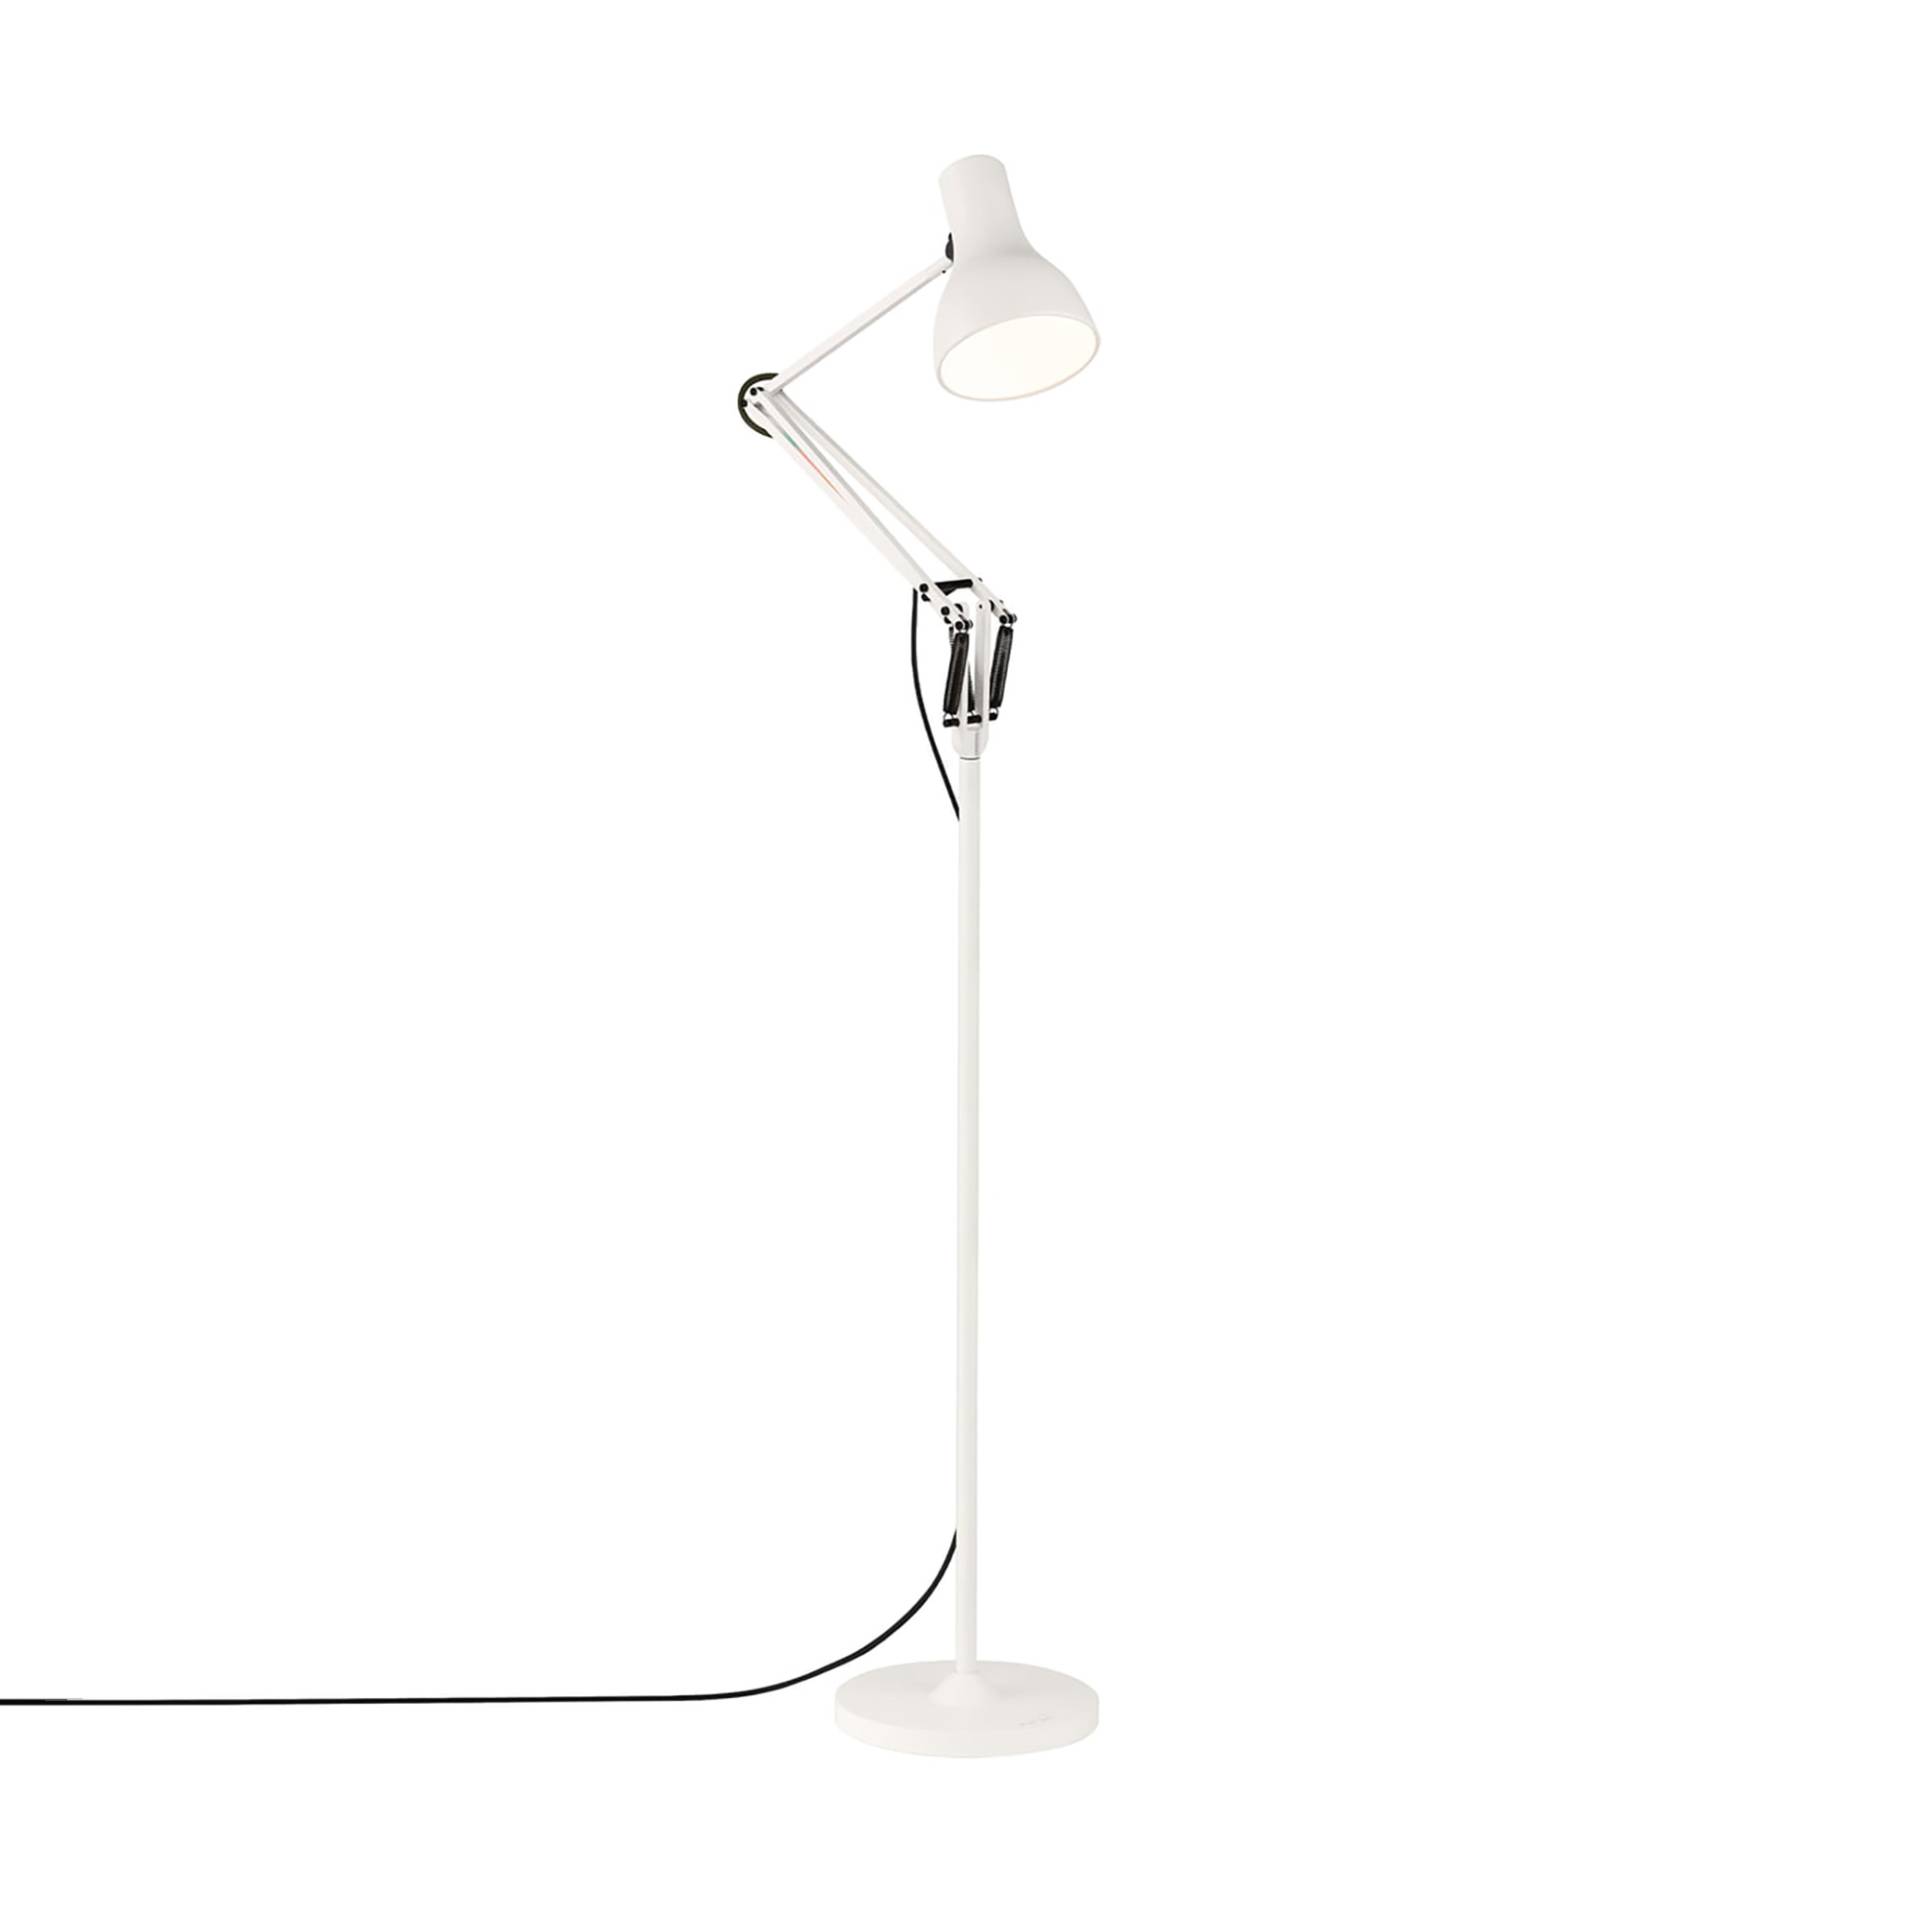 Anglepoise - Paul Smith Type 75 Stehleuchte - Edition 6 - mehrfarbig/matt/H 175cm/inkl. LED E27 6W 600lm 2700K von Anglepoise